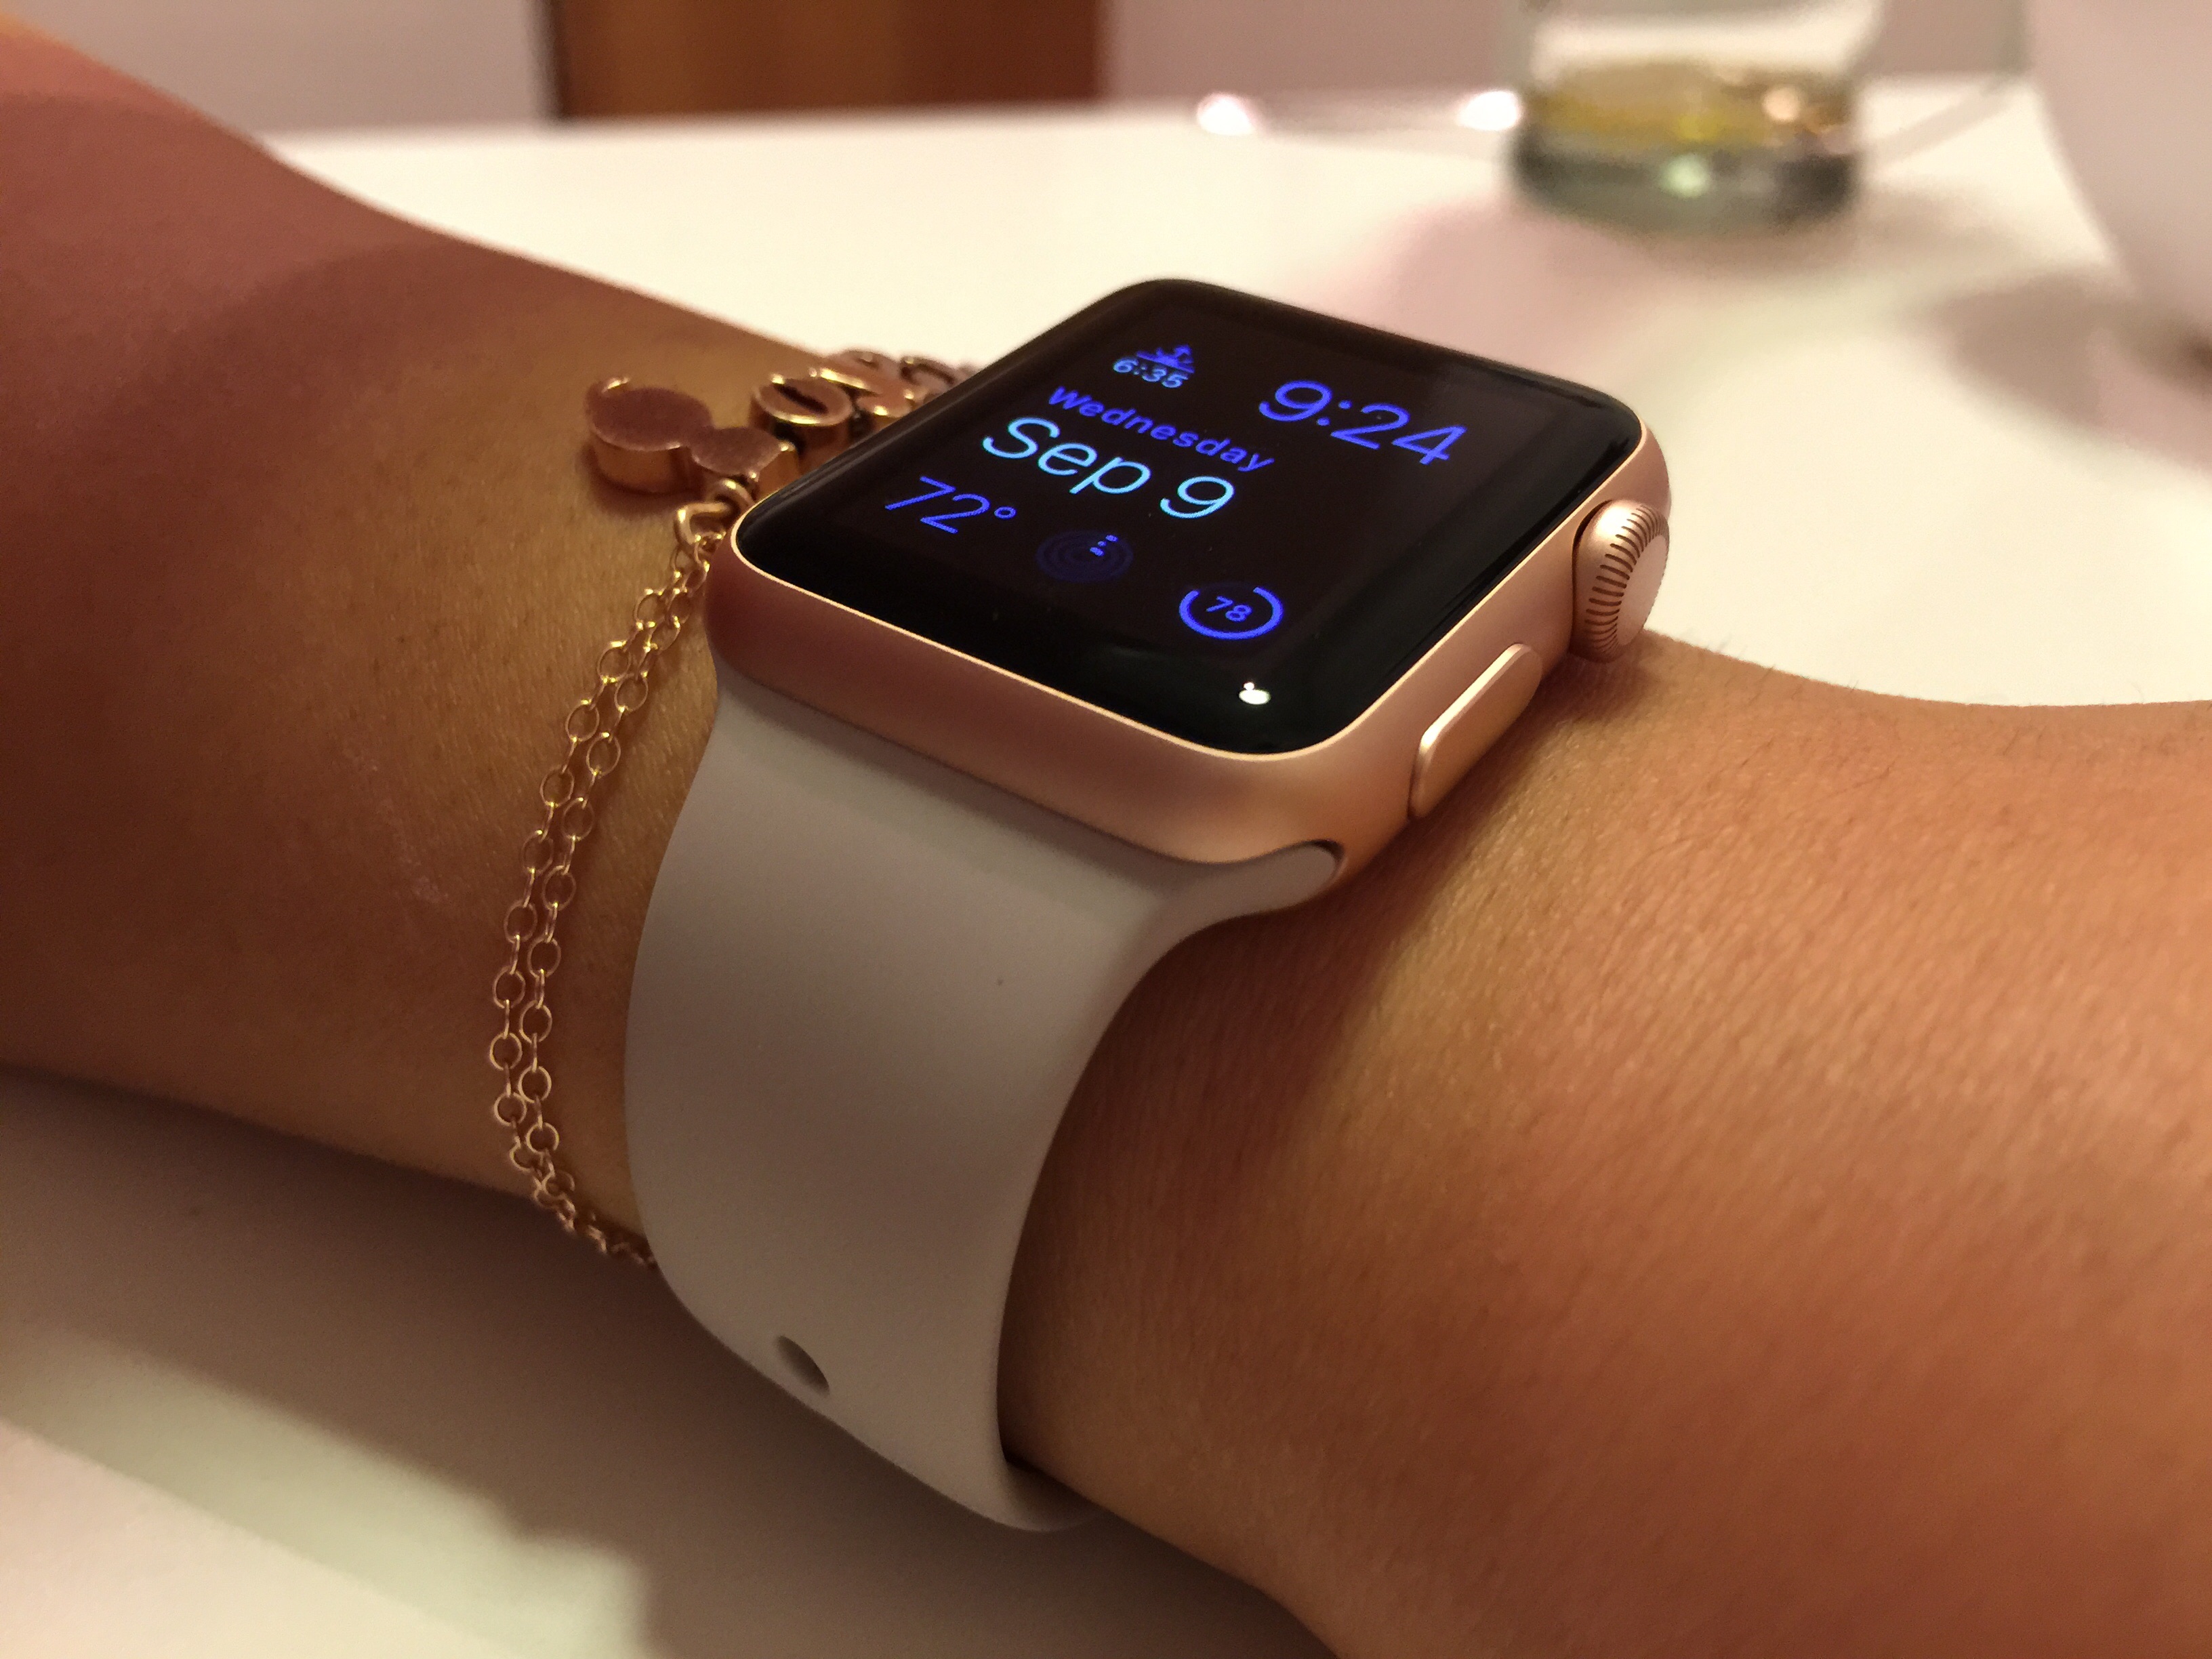 Girlfriend picked up the new rose gold | MacRumors Forums